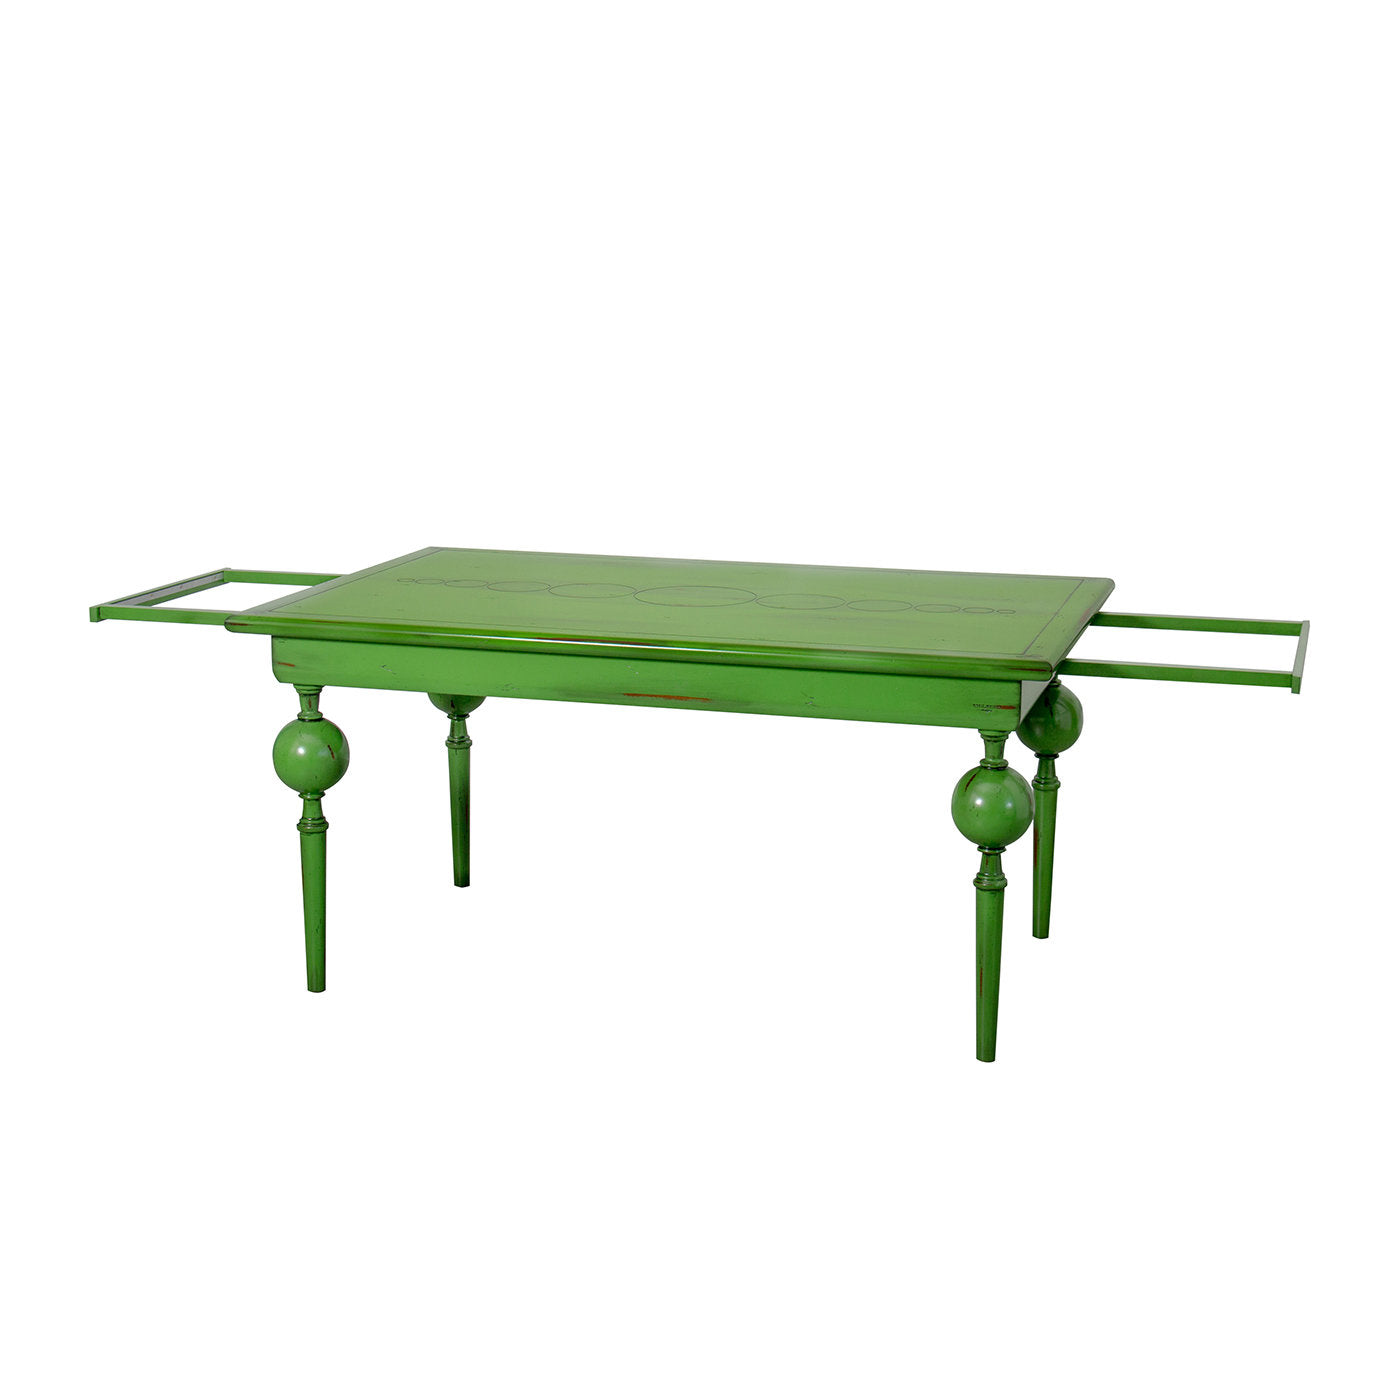 Le Bolle Extendable Table - Alternative view 2